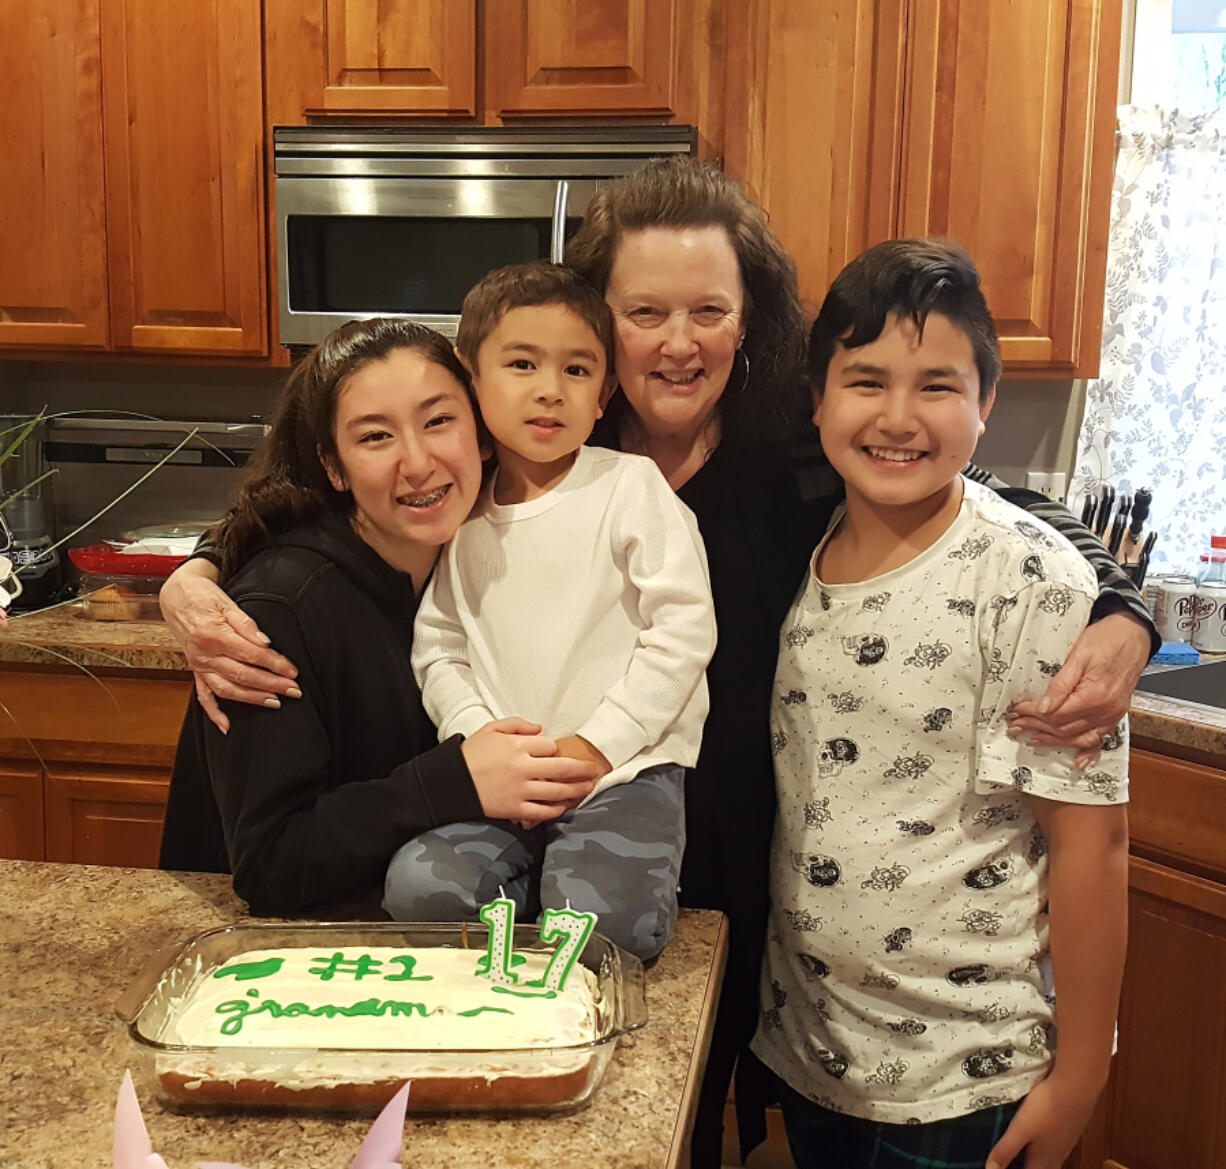 Sandra Ladd, (second from right), is pictured with her grandchildren (left to right): Emma Sasse, Hunter Sasse and Ben Sasse in an undated photo. Ladd, 71, was found murdered in her Washougal home in June 2020.